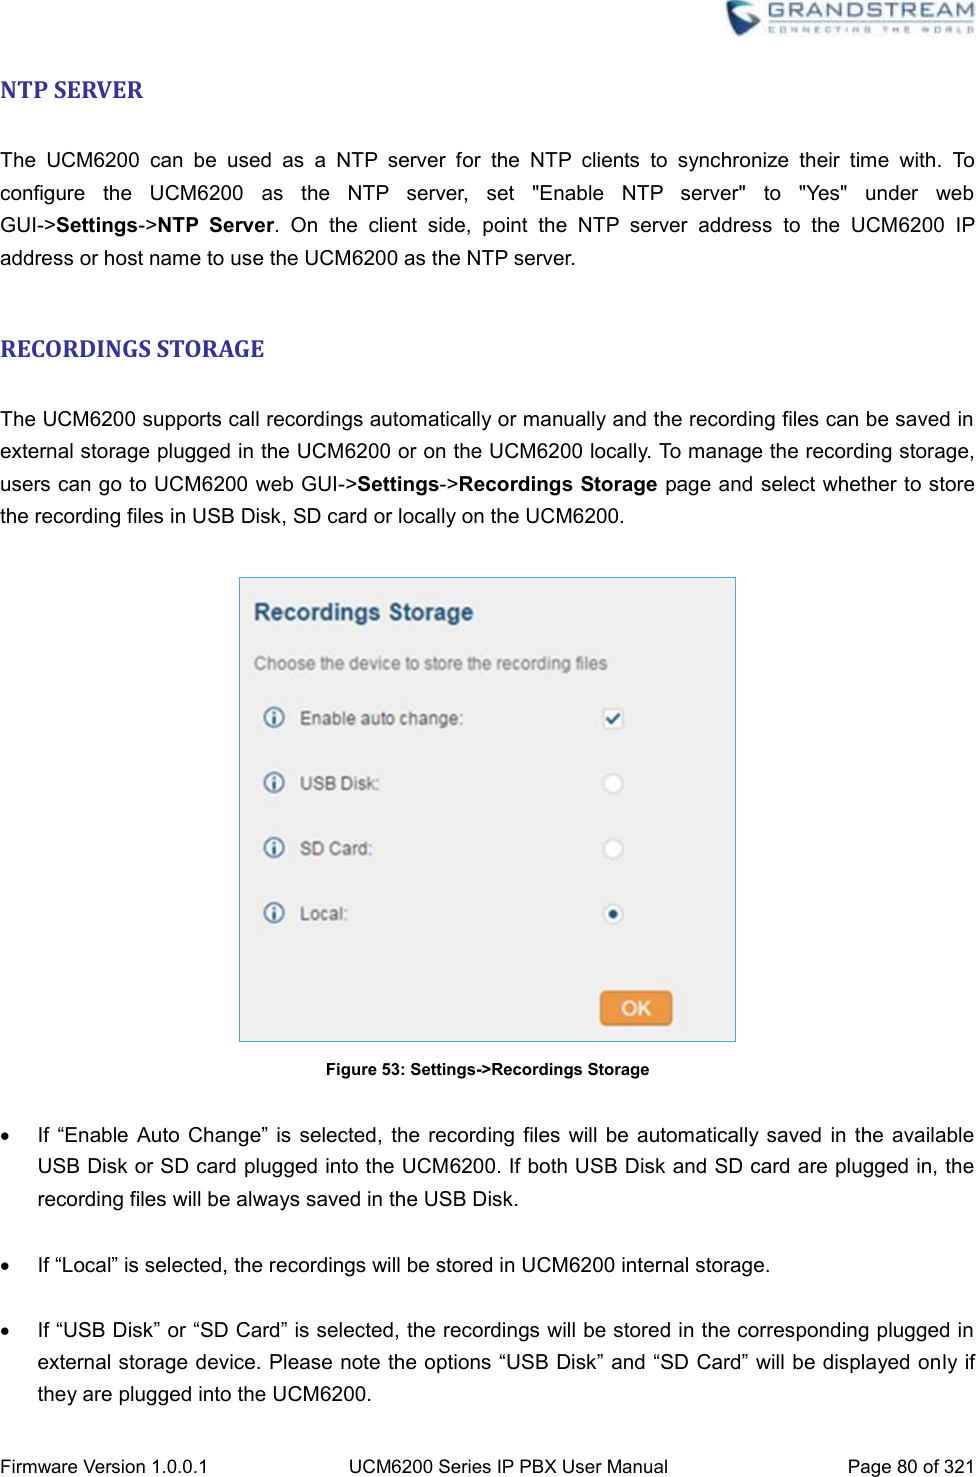  Firmware Version 1.0.0.1 UCM6200 Series IP PBX User Manual Page 80 of 321    NTP SERVER  The  UCM6200  can  be  used  as  a  NTP  server  for  the  NTP  clients  to  synchronize  their  time  with.  To configure  the  UCM6200  as  the  NTP  server,  set  &quot;Enable  NTP  server&quot;  to  &quot;Yes&quot;  under  web GUI-&gt;Settings-&gt;NTP  Server.  On  the  client  side,  point  the  NTP  server  address  to  the  UCM6200  IP address or host name to use the UCM6200 as the NTP server.  RECORDINGS STORAGE  The UCM6200 supports call recordings automatically or manually and the recording files can be saved in external storage plugged in the UCM6200 or on the UCM6200 locally. To manage the recording storage, users can go to UCM6200 web GUI-&gt;Settings-&gt;Recordings Storage page and select whether to store the recording files in USB Disk, SD card or locally on the UCM6200.   Figure 53: Settings-&gt;Recordings Storage   If  “Enable Auto  Change”  is selected,  the recording files  will be  automatically saved  in the  available USB Disk or SD card plugged into the UCM6200. If both USB Disk and SD card are plugged in, the recording files will be always saved in the USB Disk.   If “Local” is selected, the recordings will be stored in UCM6200 internal storage.   If “USB Disk” or “SD Card” is selected, the recordings will be stored in the corresponding plugged in external storage device. Please note the options “USB Disk” and “SD Card” will be displayed only if they are plugged into the UCM6200. 